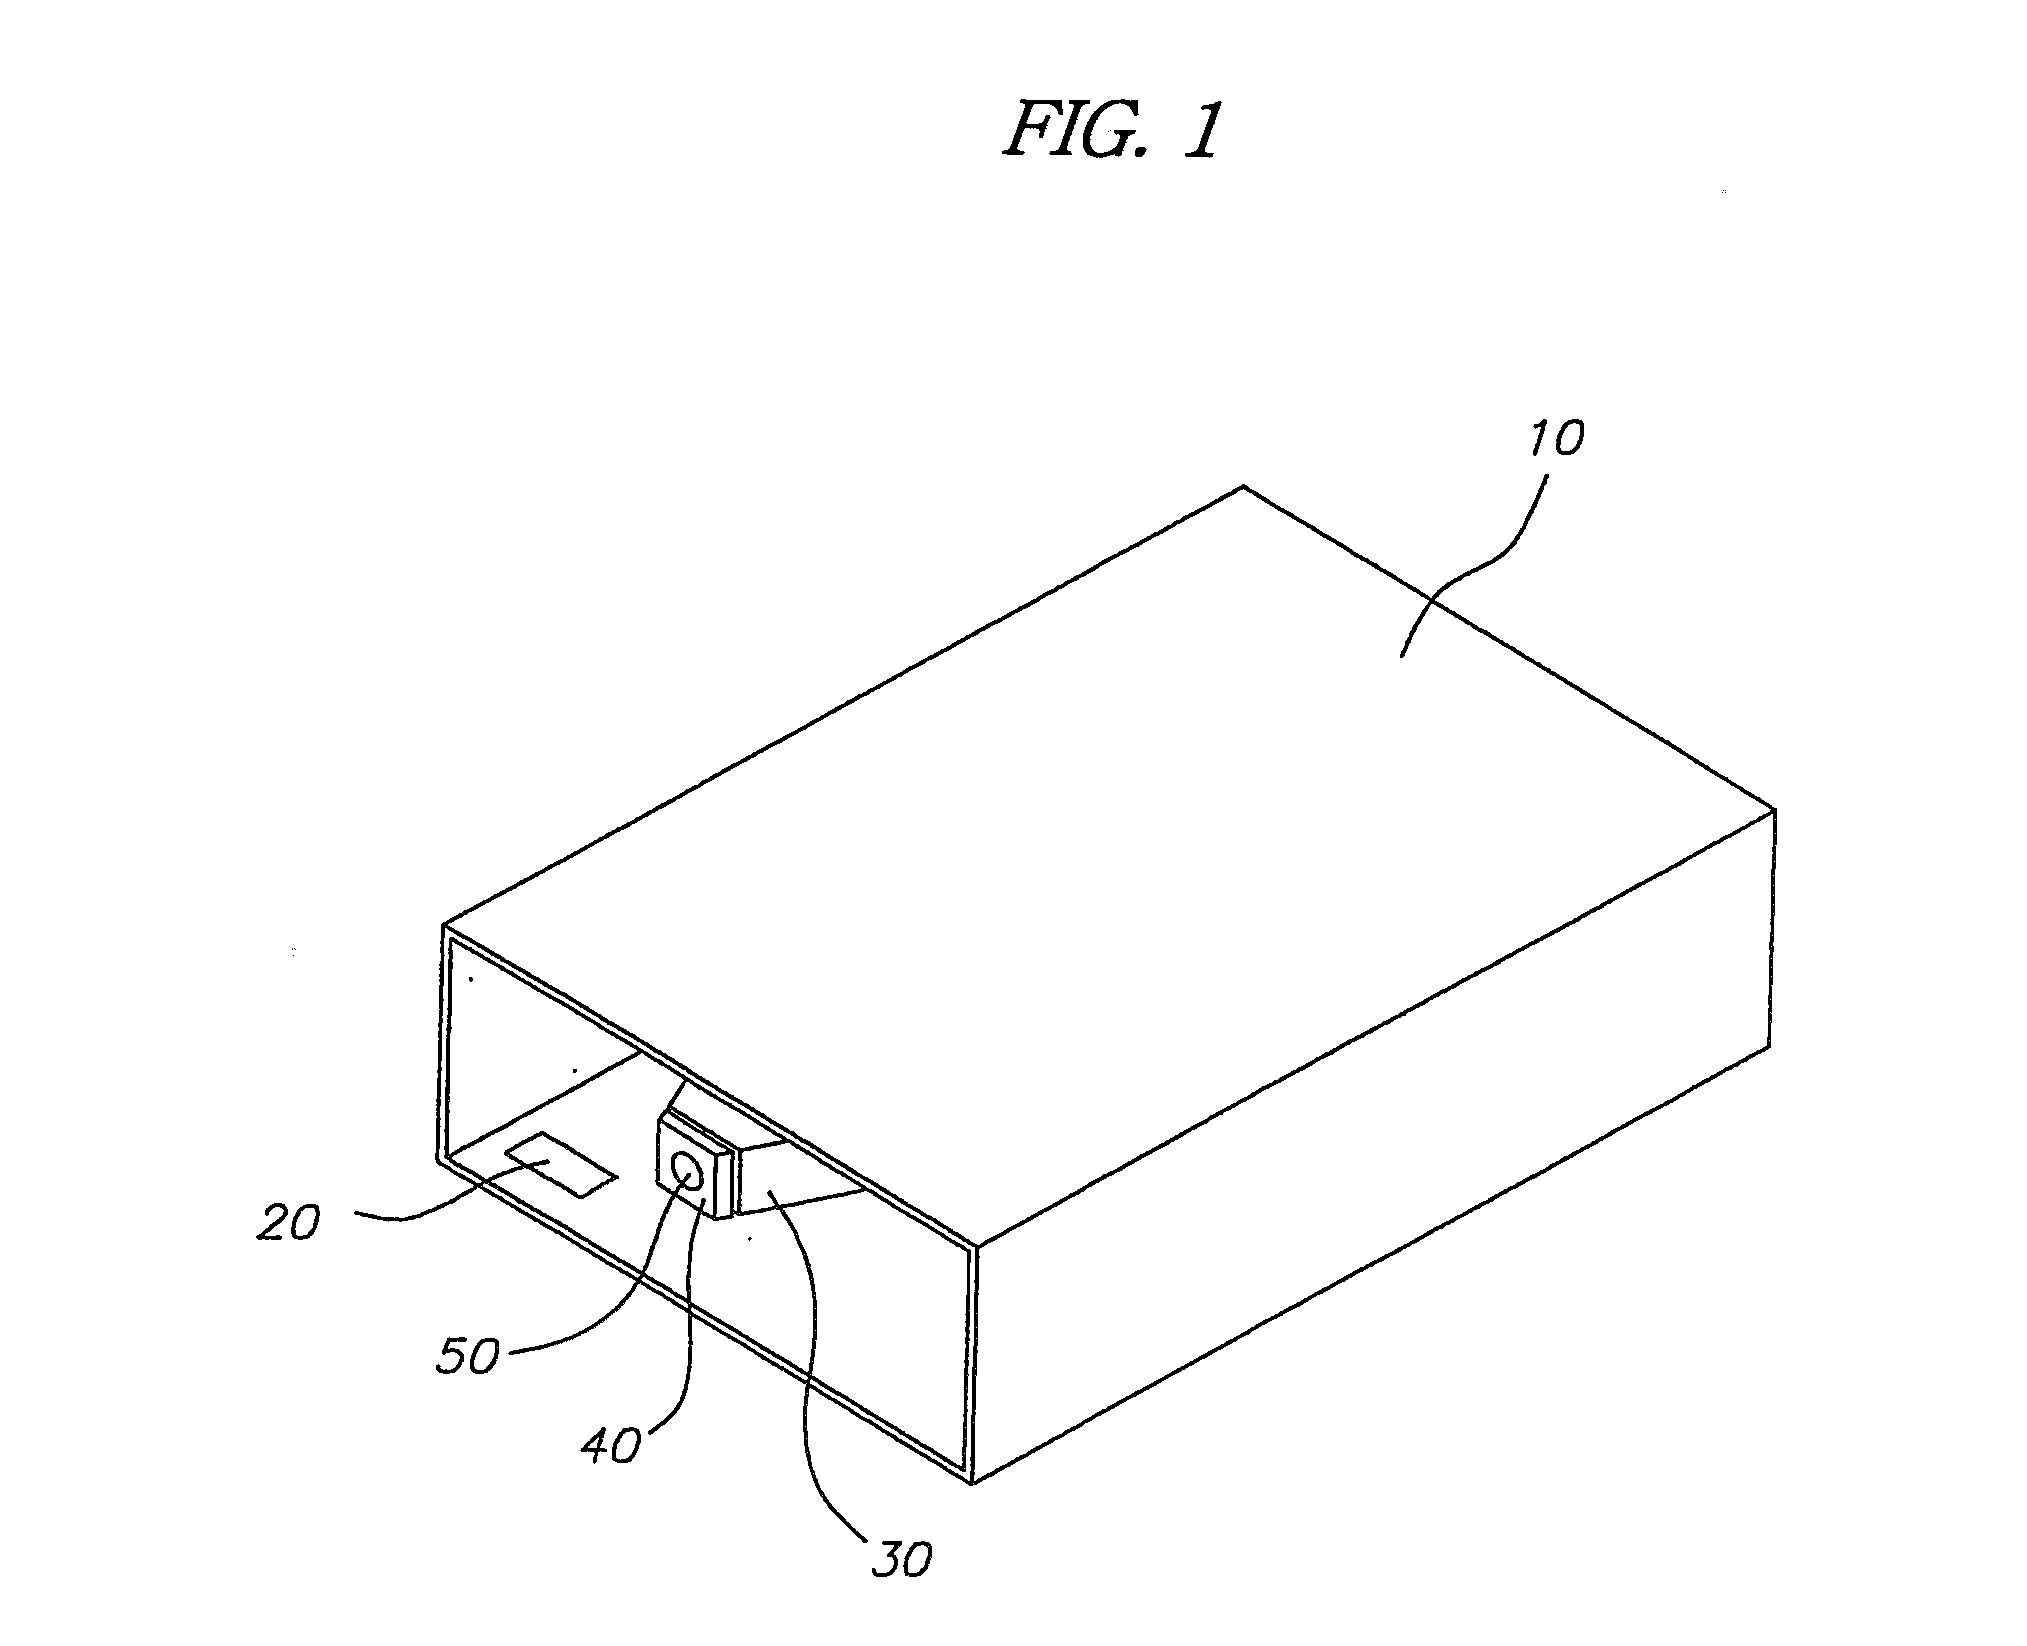 System and method for non-invasive spectroscopic detection for blood alcohol concentration